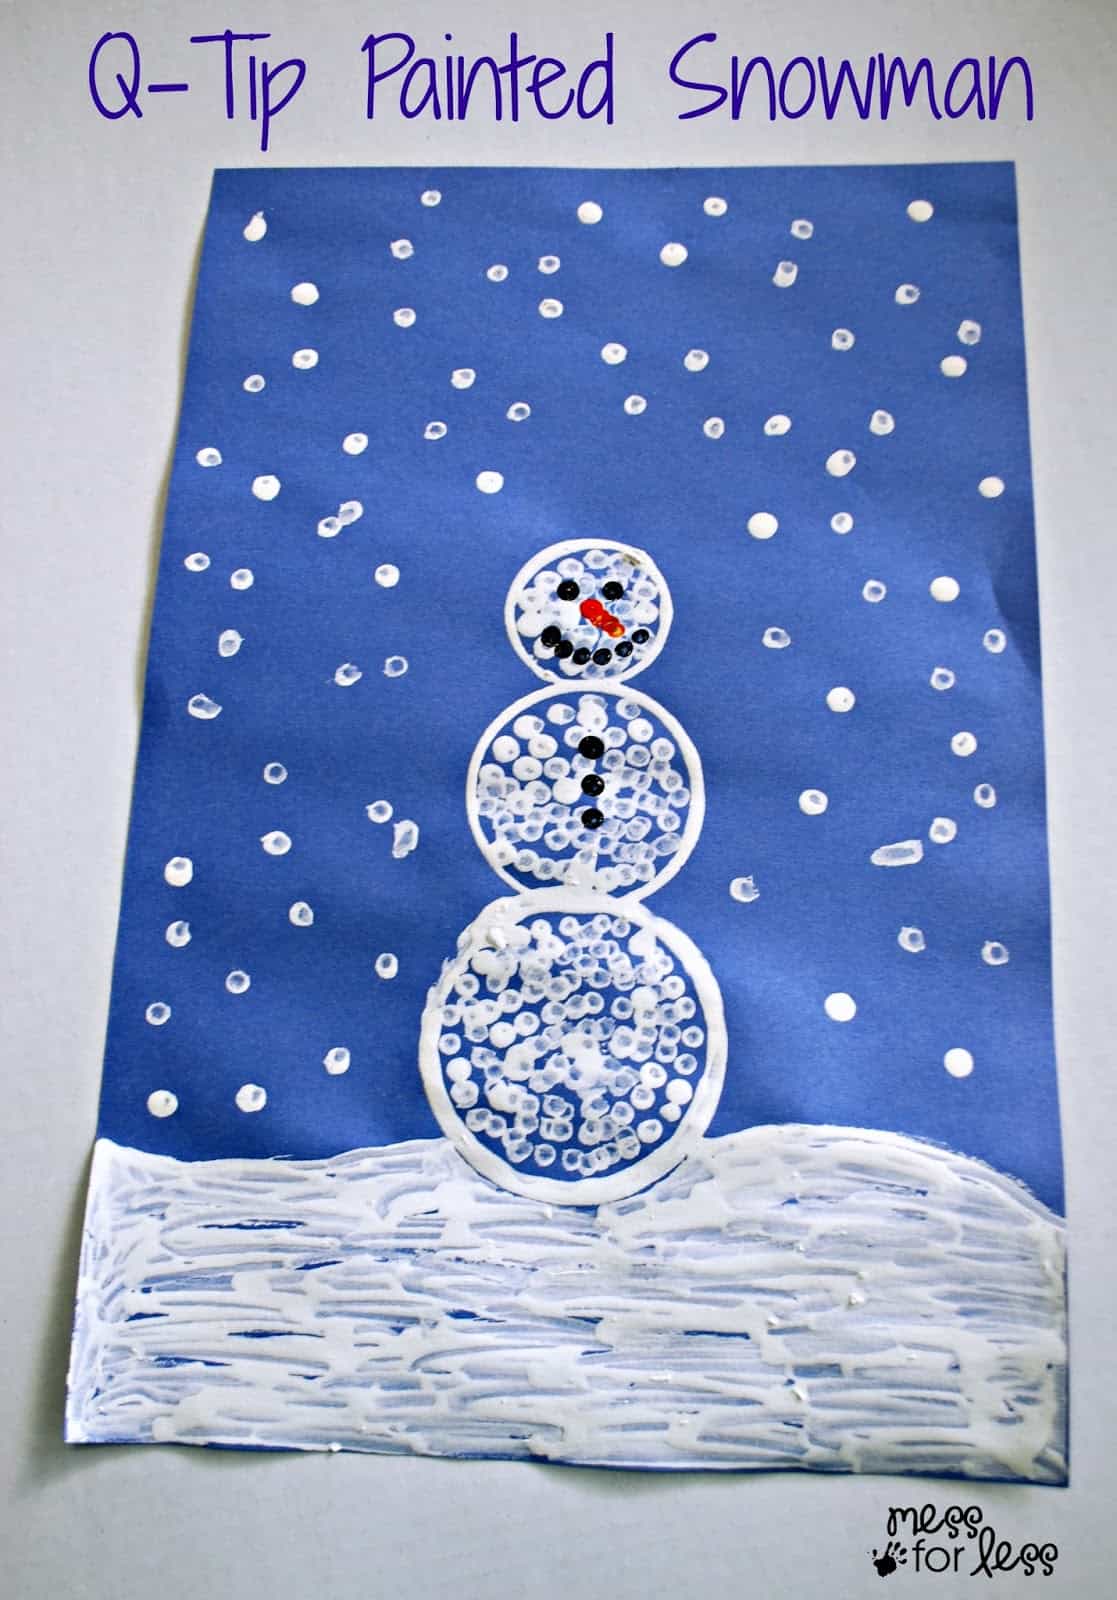 Q-tip Painted Snowman Craft - such a fun winter craft for kids. They love painting with q-tips!